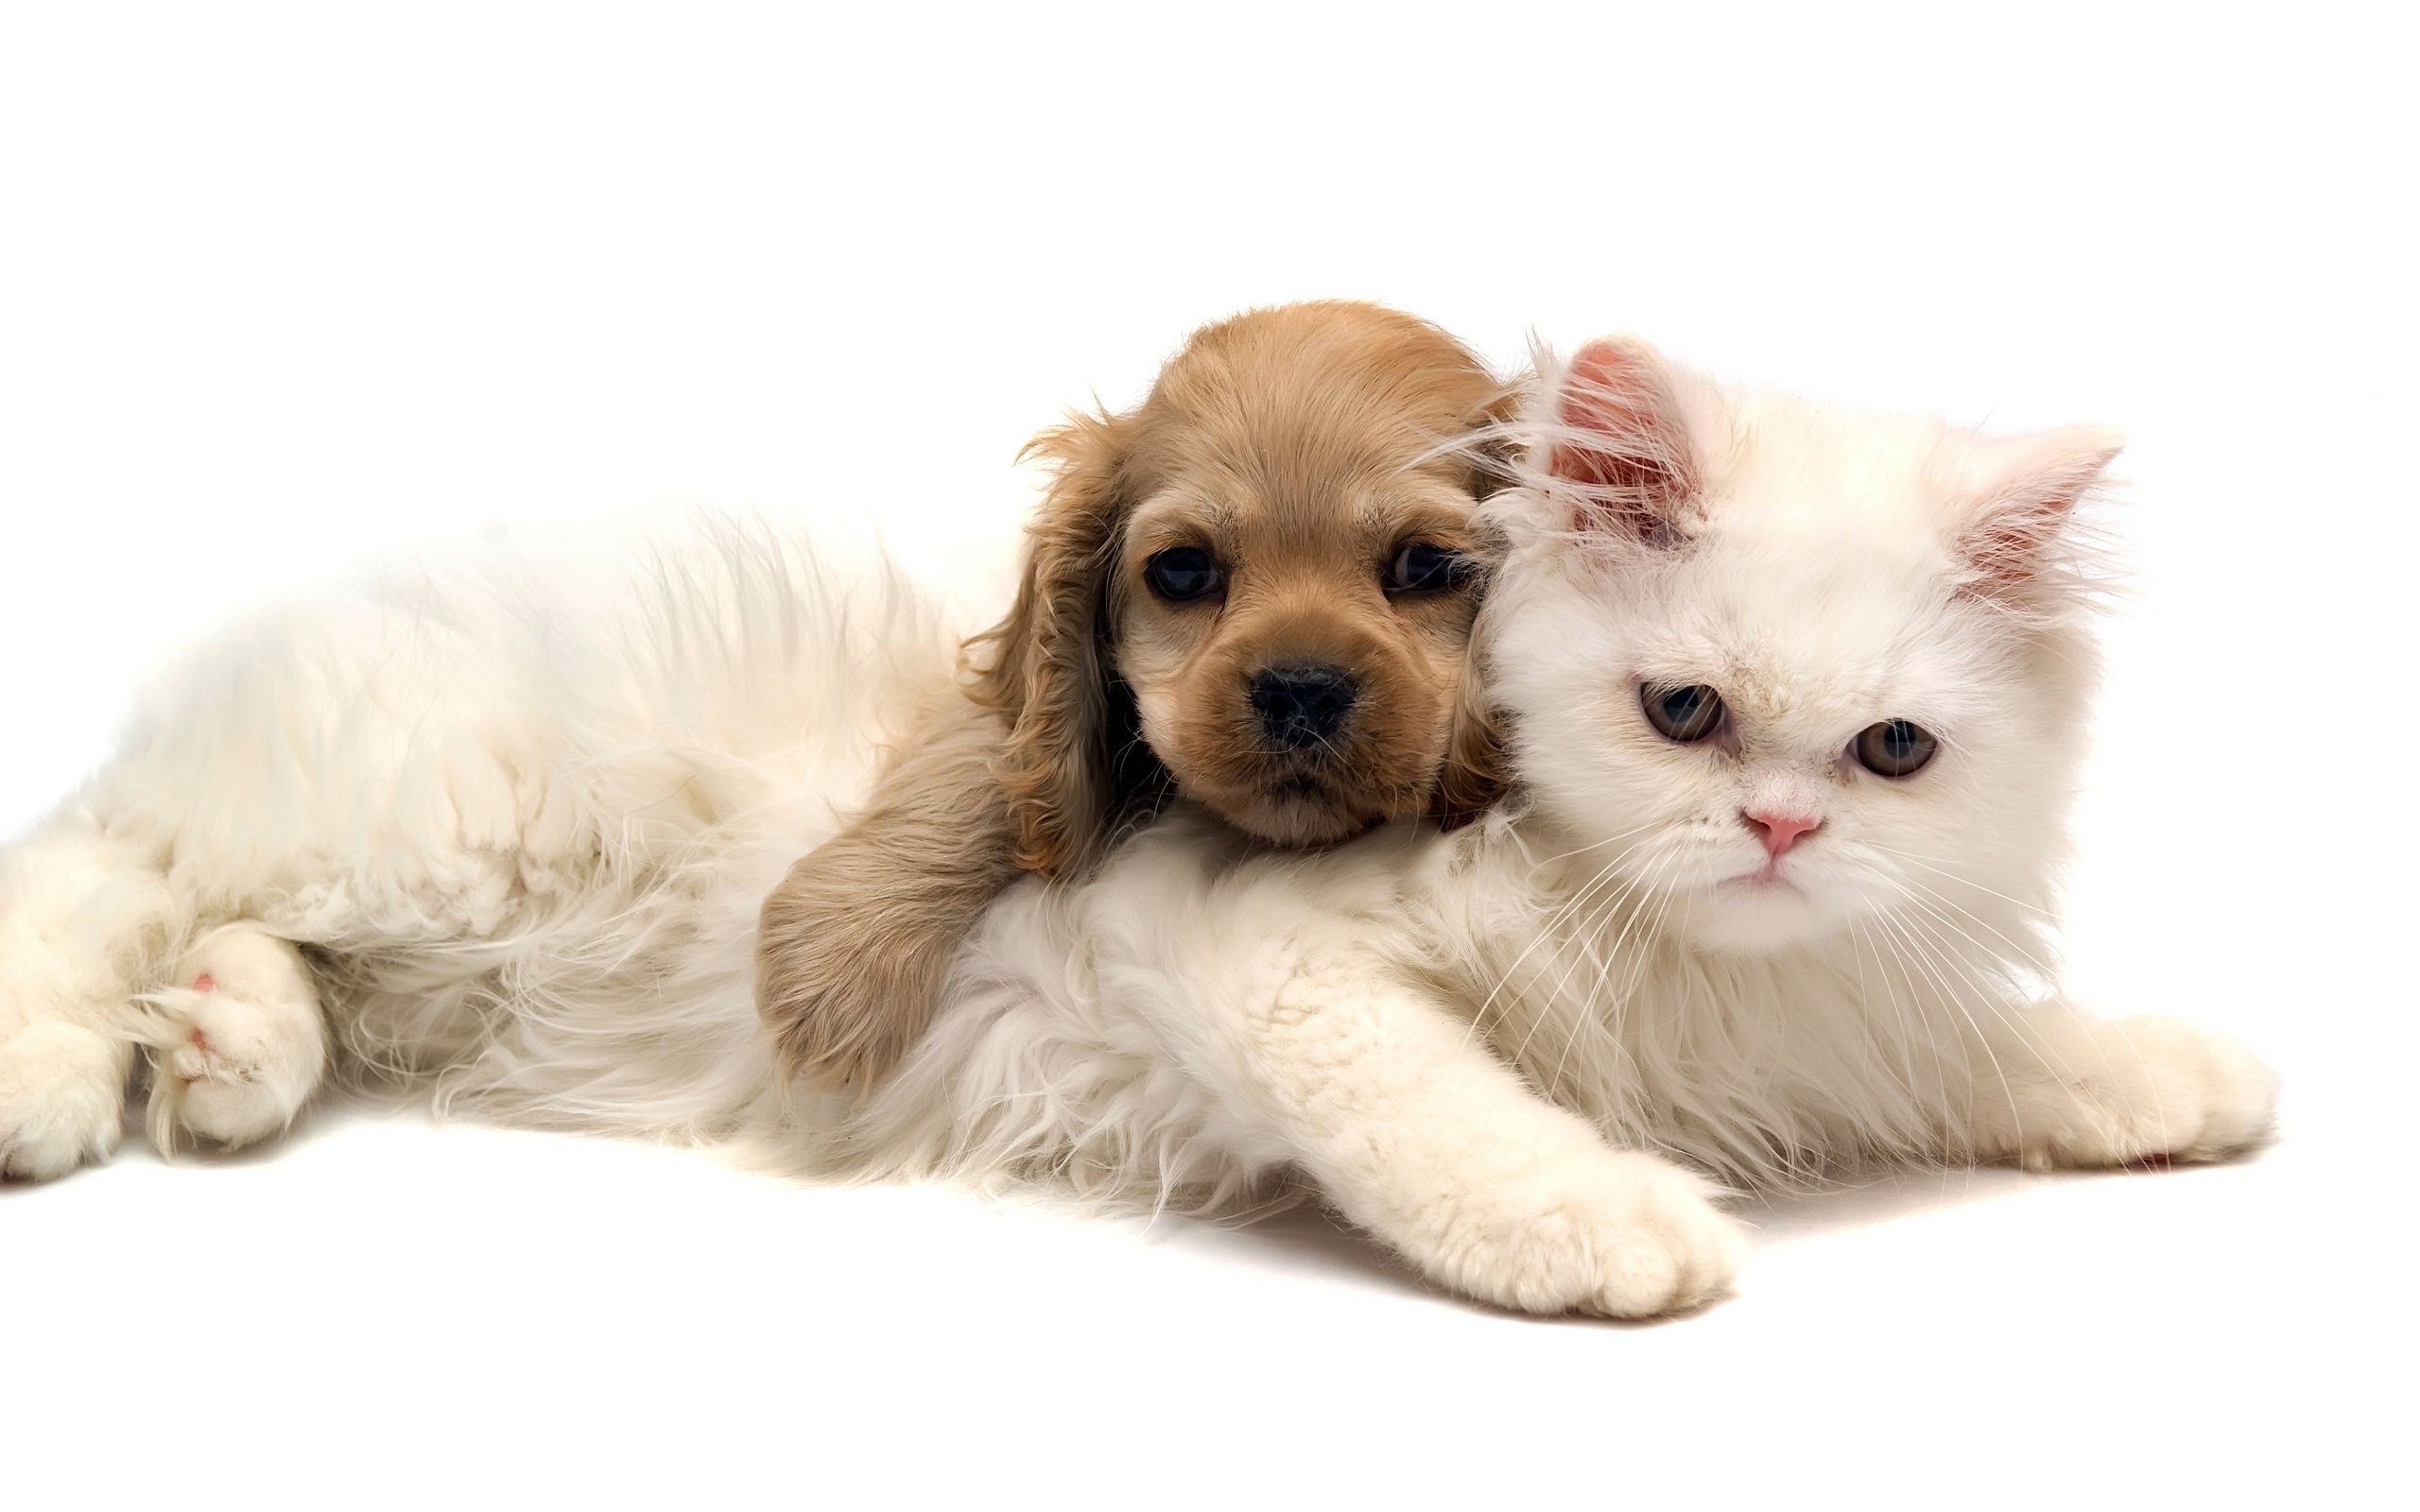 Baby Cats And Dogs Pics Wallpaper - Cute Cats With Dogs - HD Wallpaper 